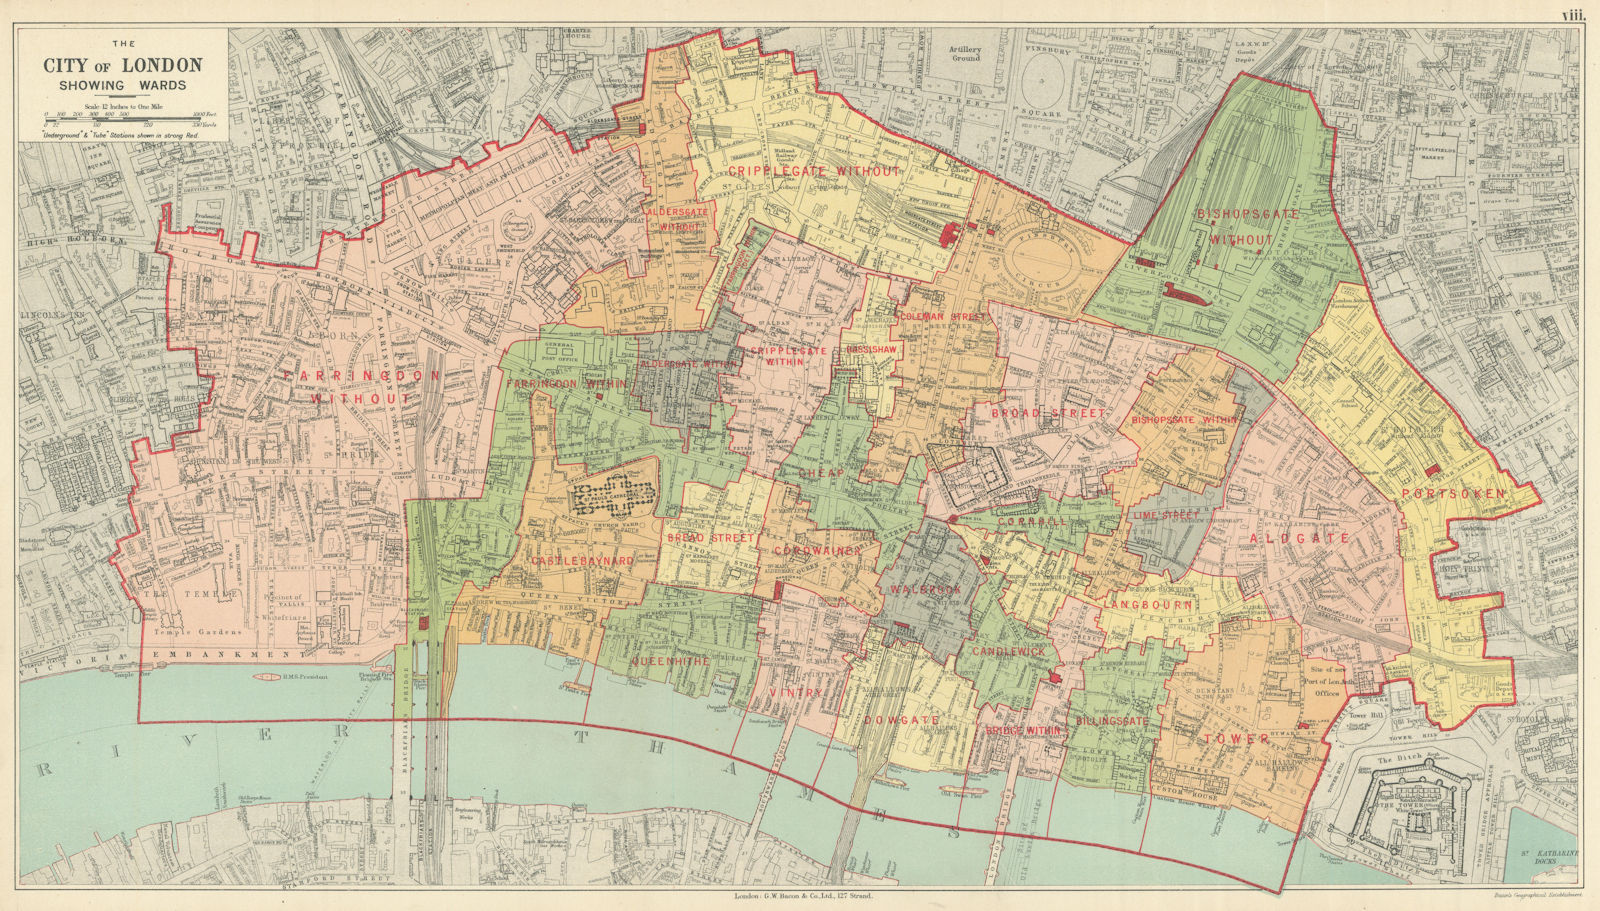 CITY OF LONDON showing WARDS. Churches & public buildings plans. BACON 1919 map